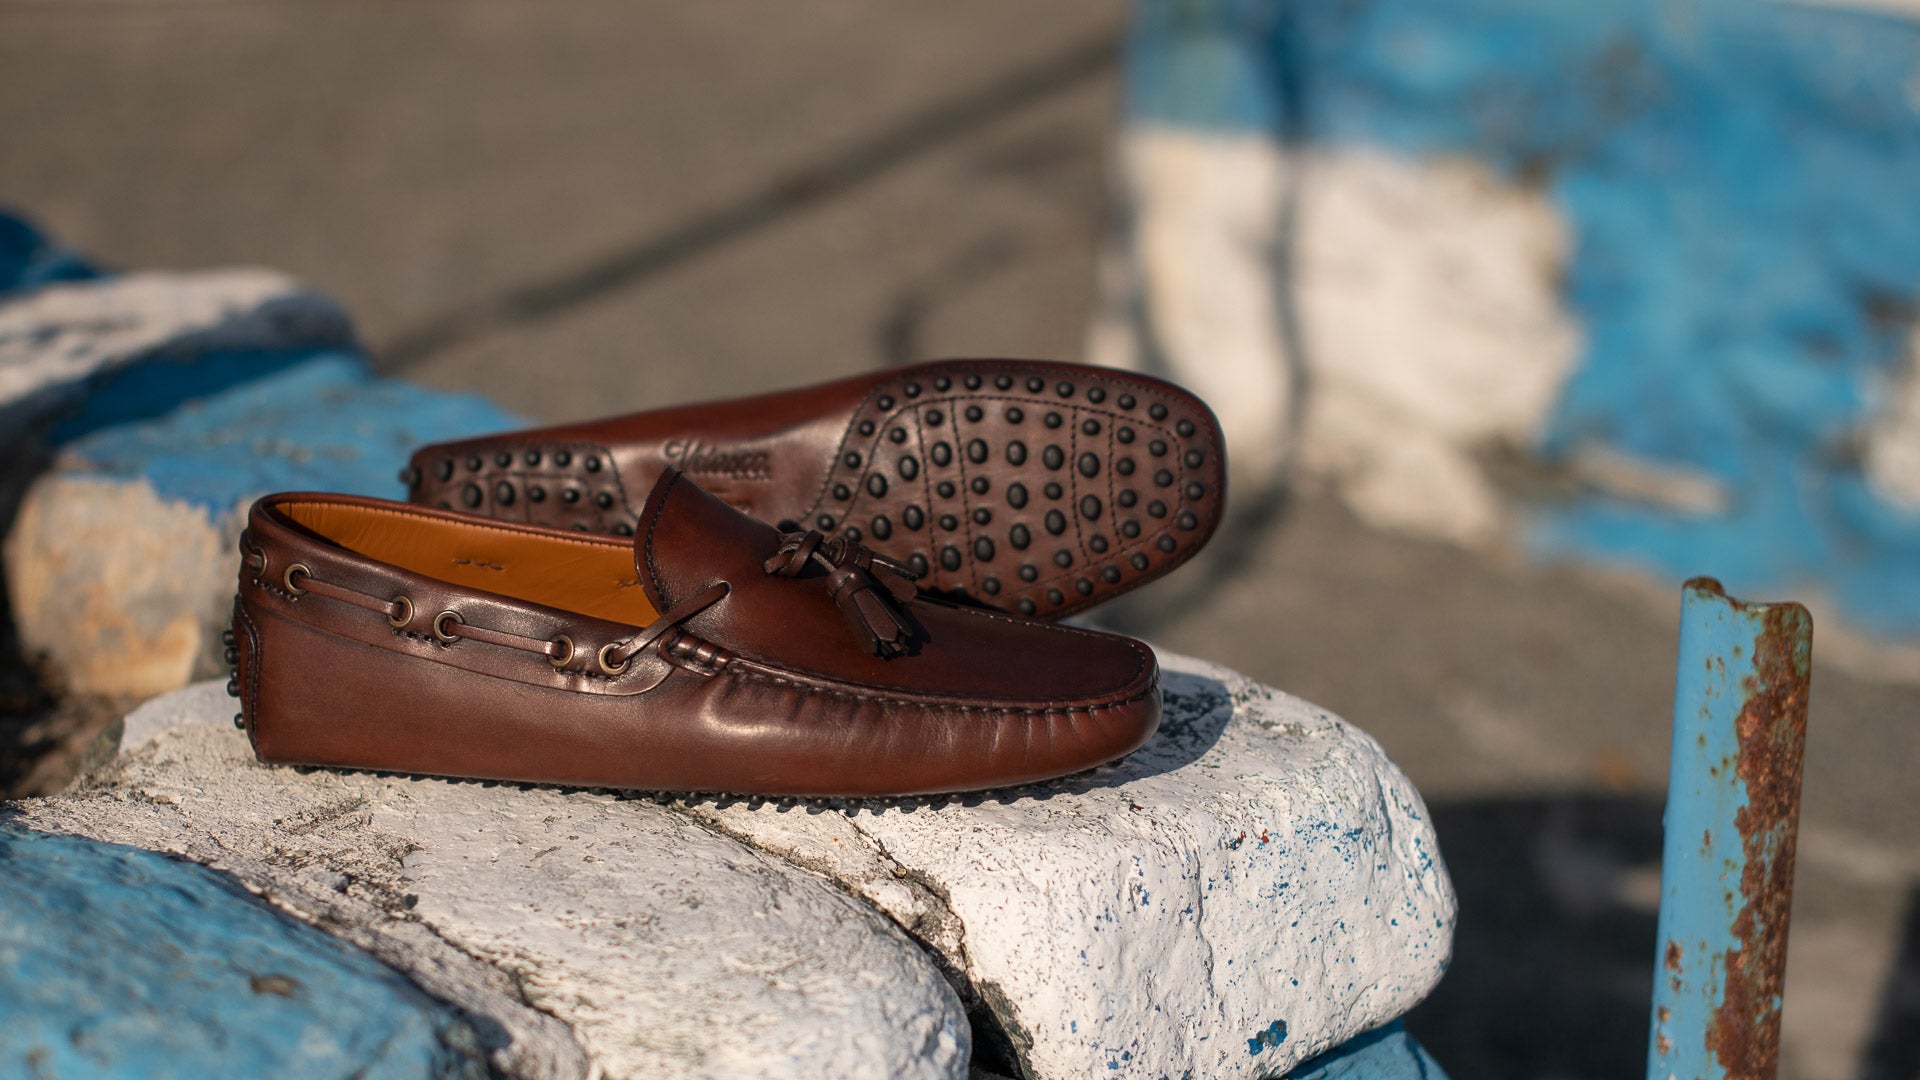 carlo moccasin brown leather